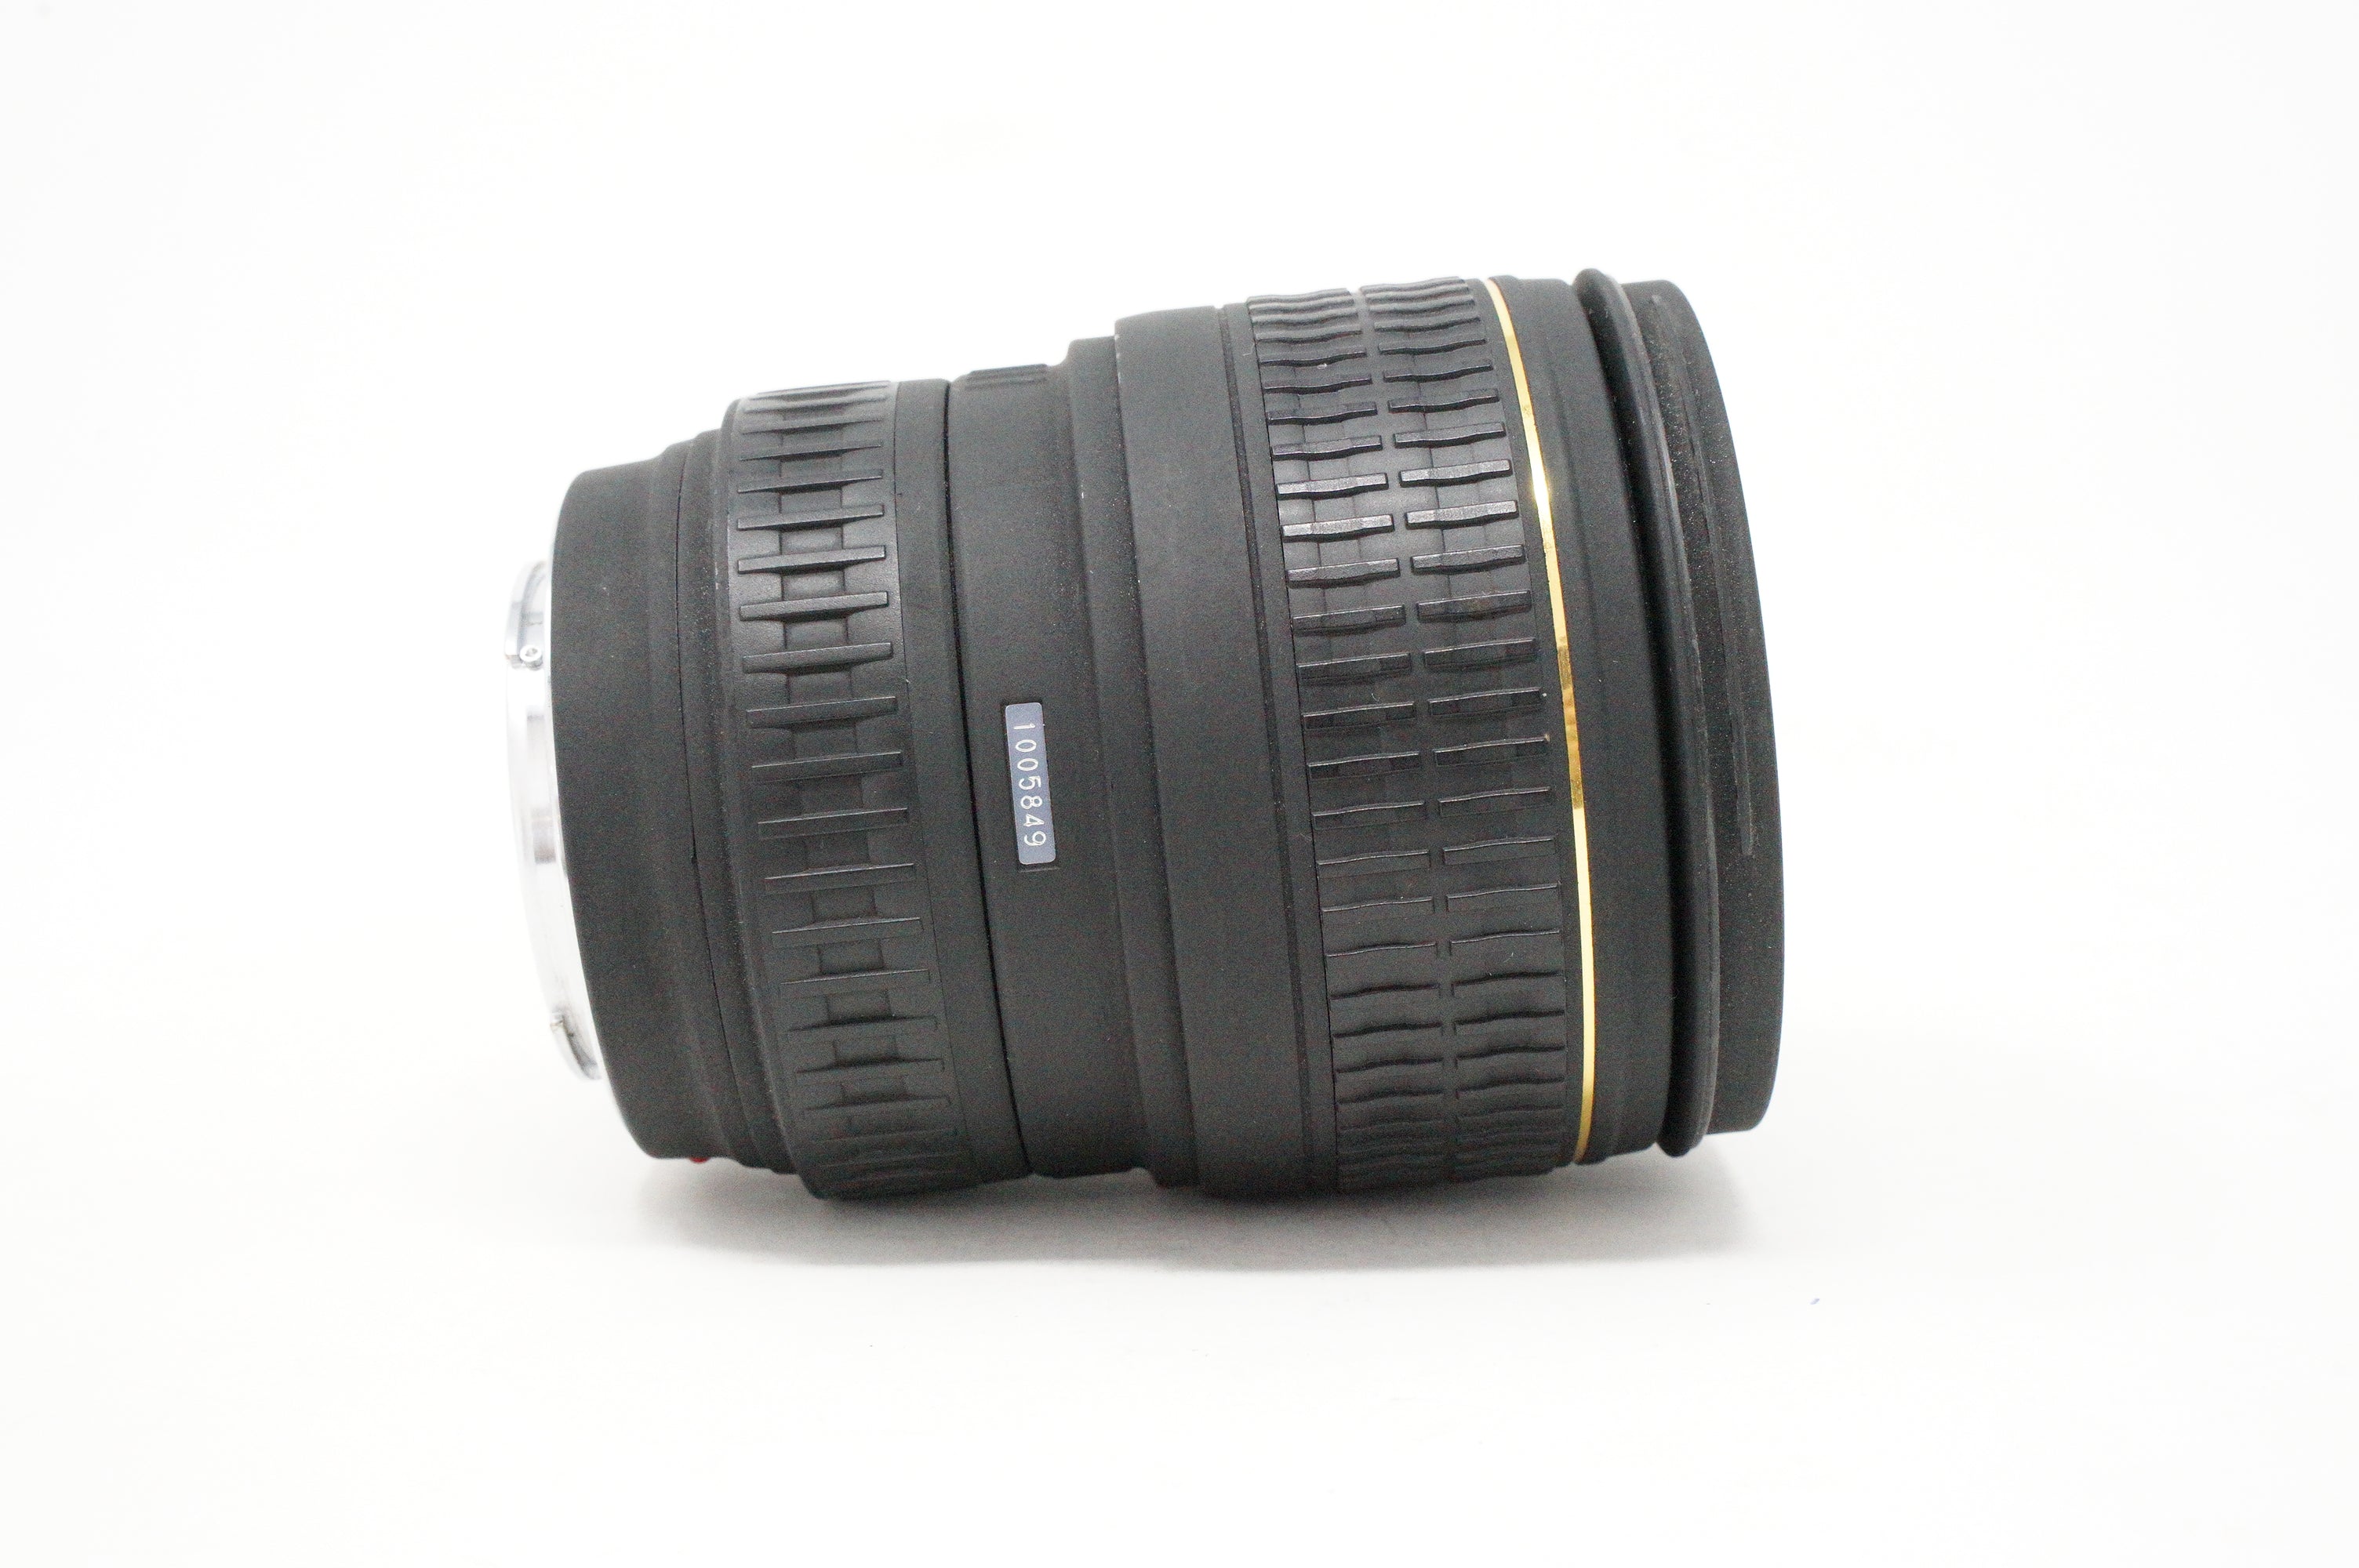 Used Sigma EX 28-70mm f2.8 DF lens for Sony A-Mount (SH39261)